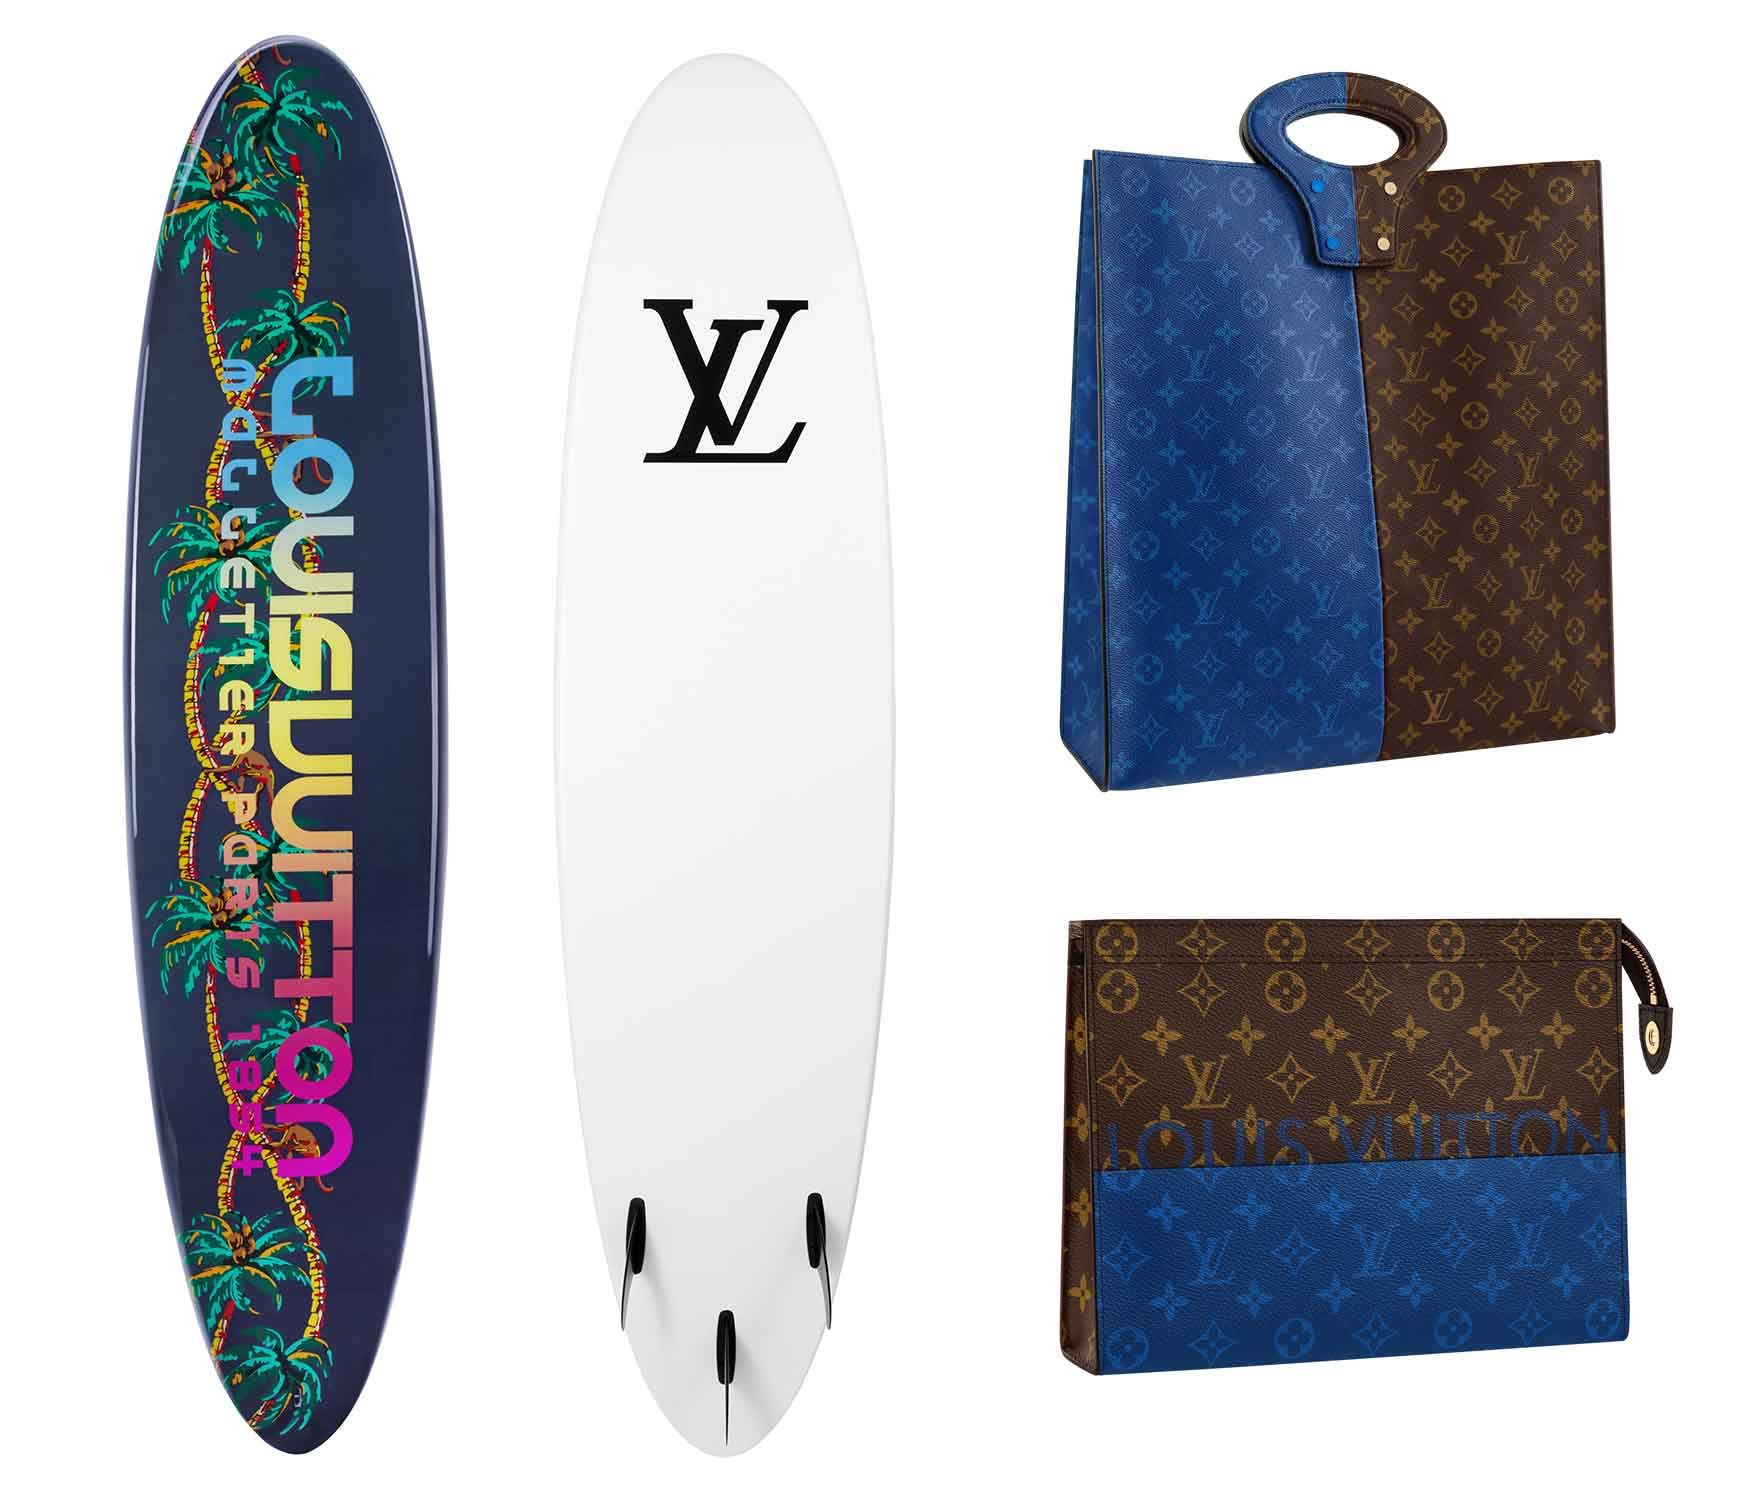 Louis Vuitton Is Dropping New Limited-Edition Gear Across the US